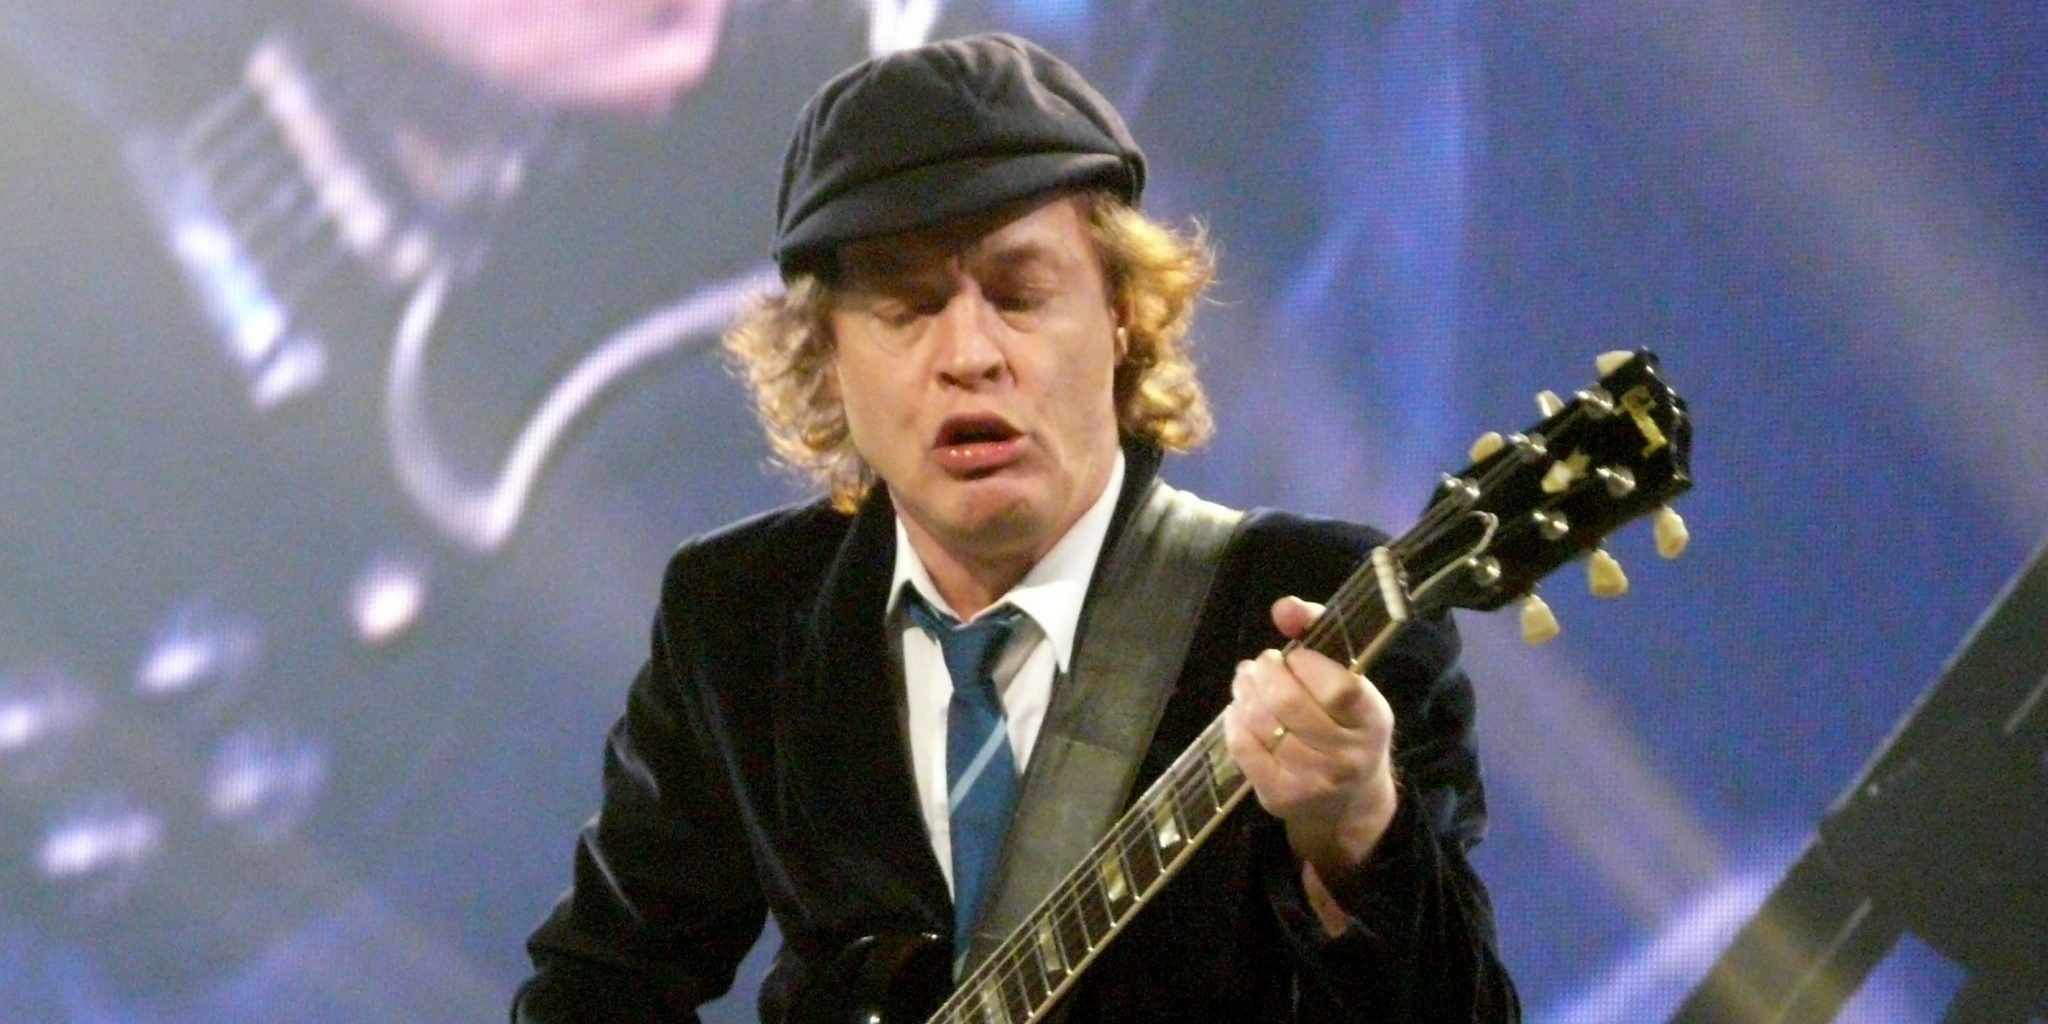 Angus Young Net Worth March 2023, Salary, Age, Siblings, Bio, Family